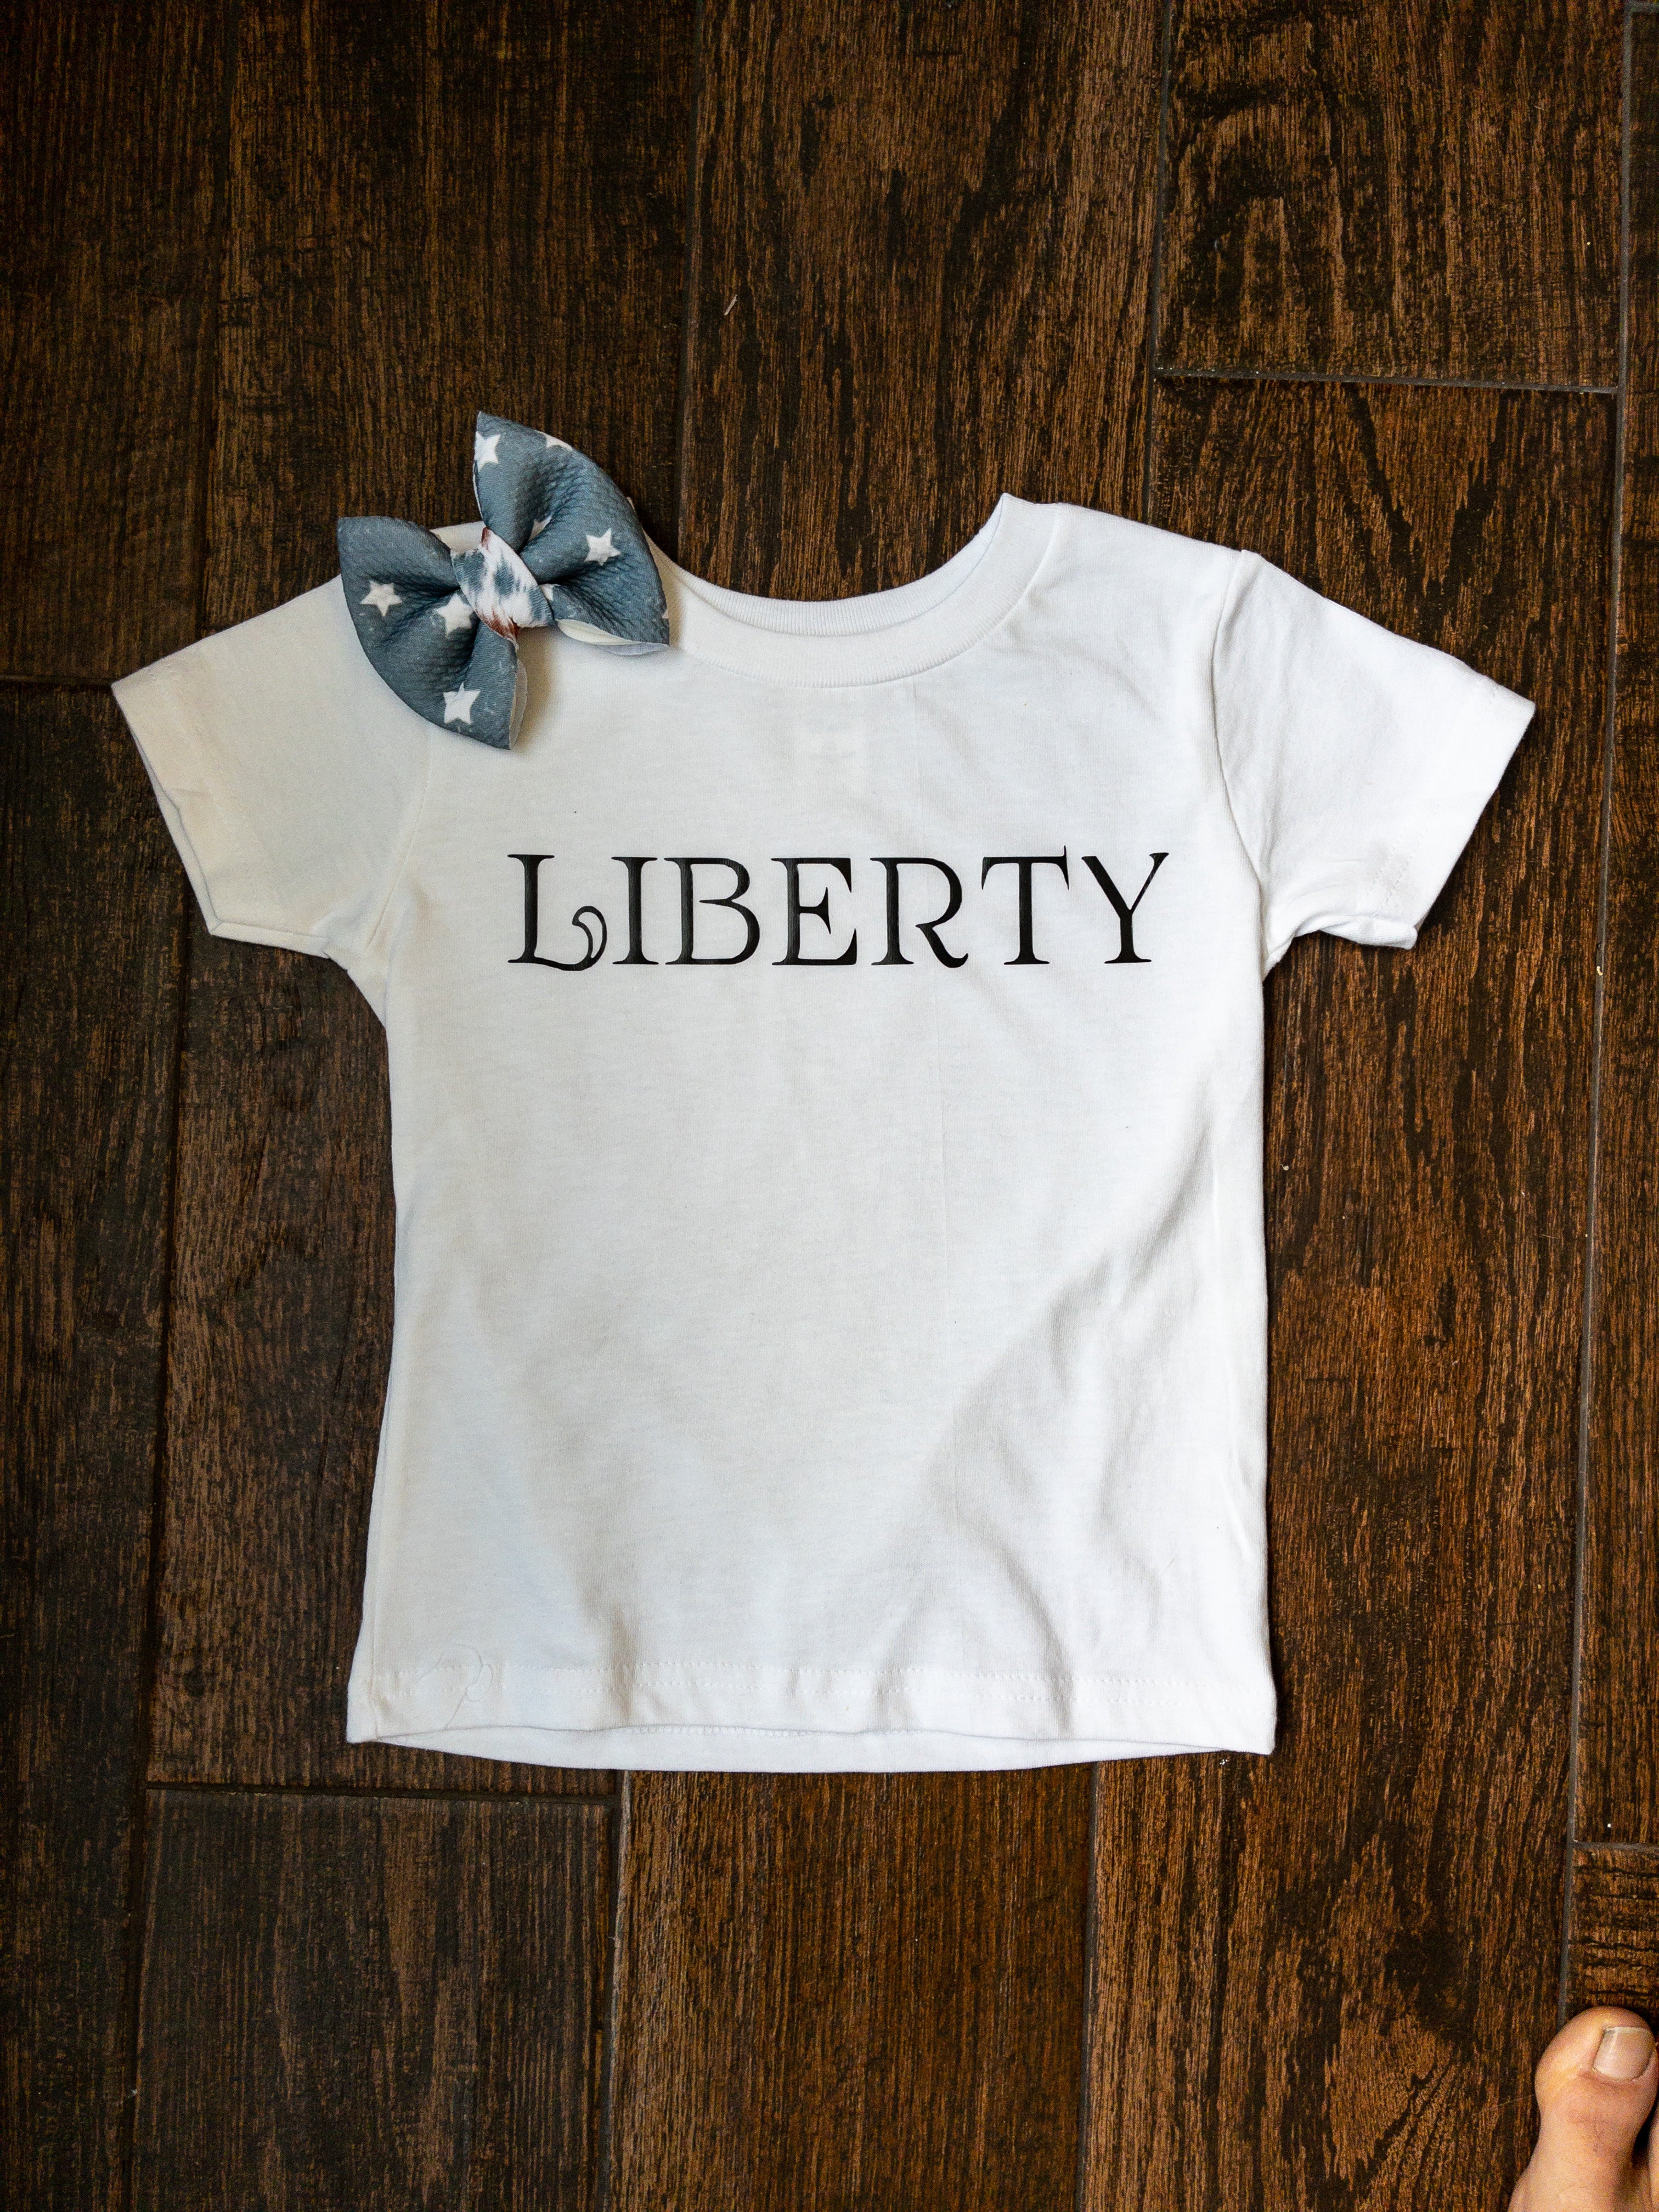 Liberty Two Tone Baby Girl Bummie Outfit